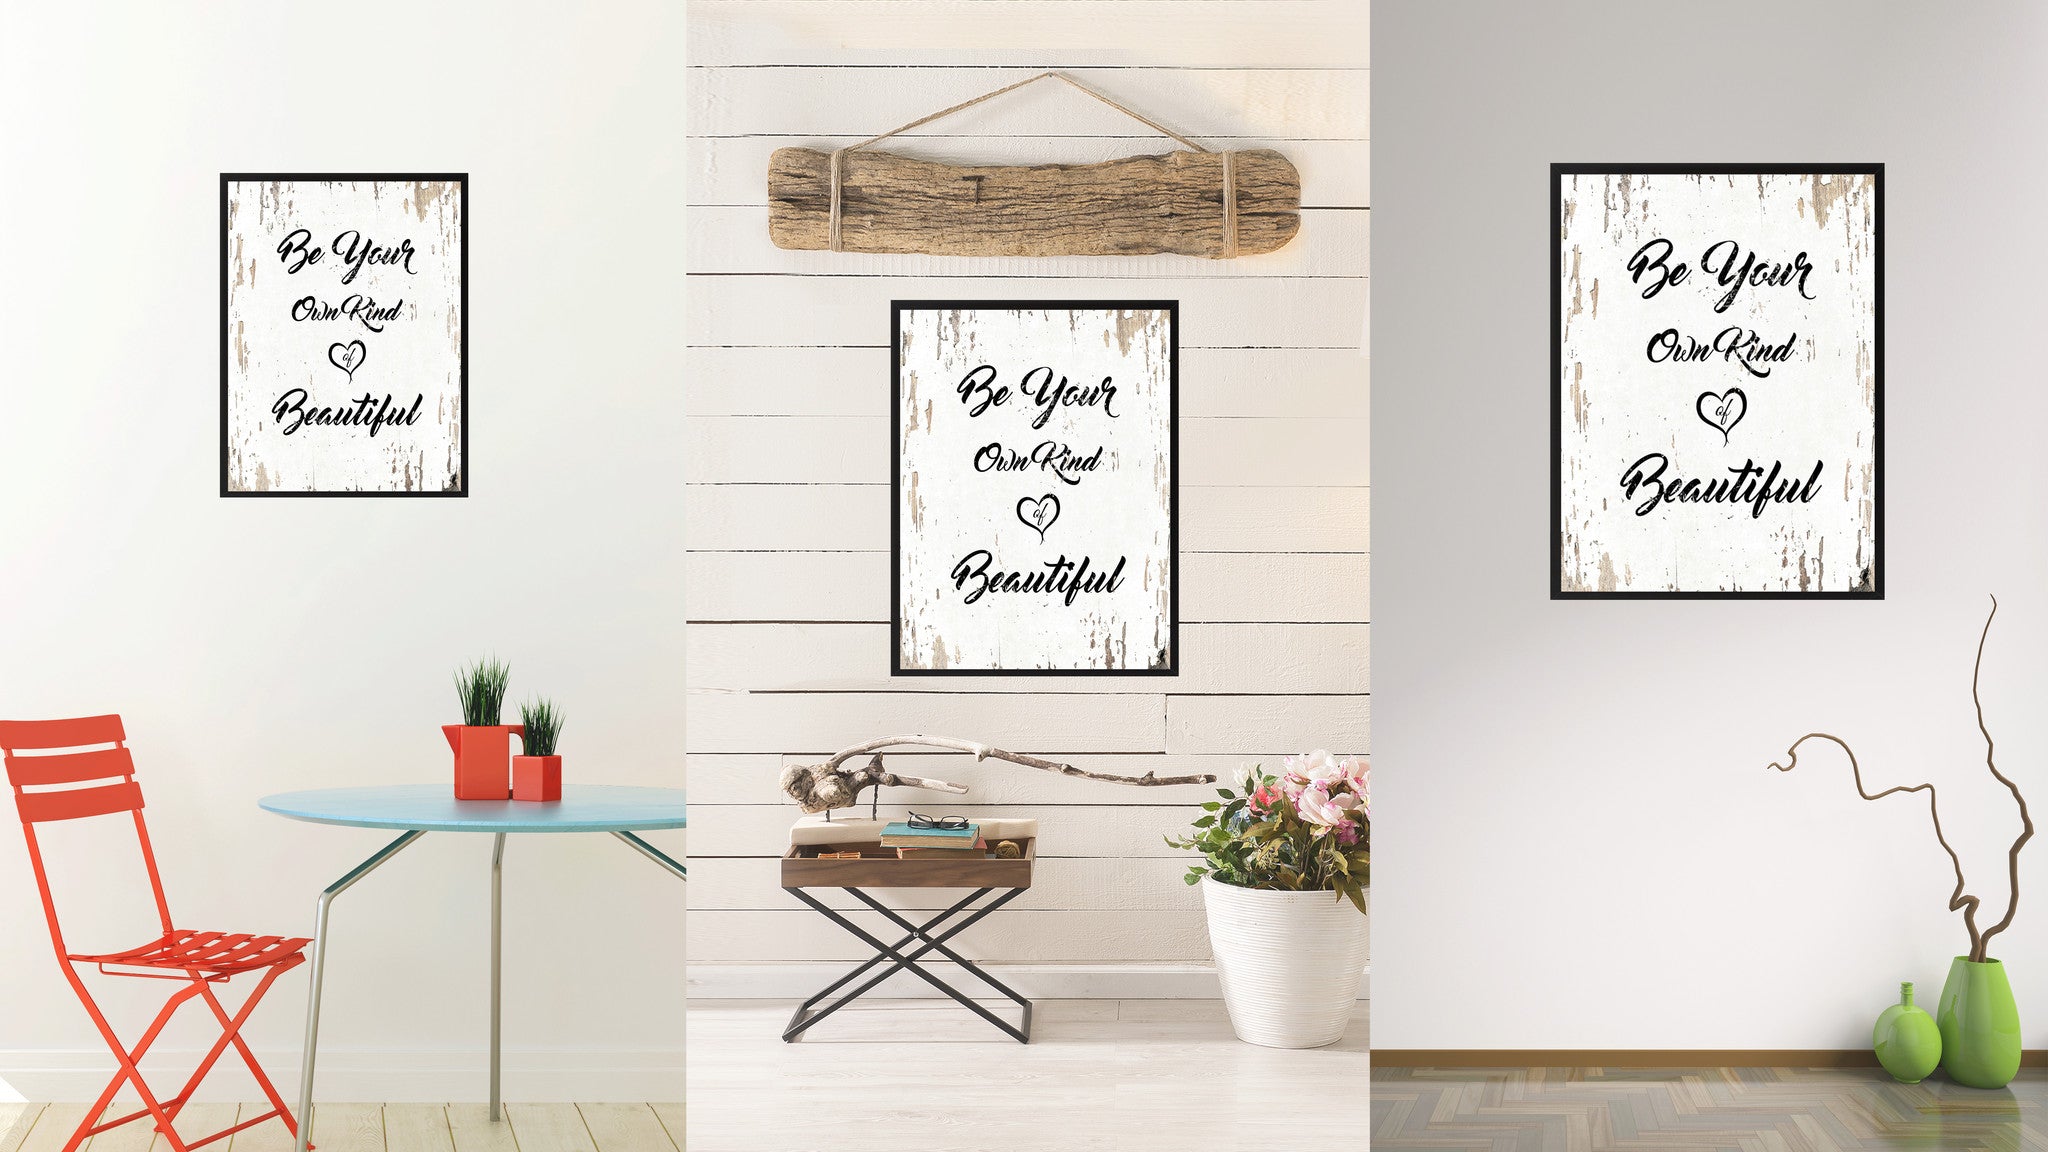 Be your own kind of beautiful Inspirational Quote Saying Gift Ideas Home Decor Wall Art